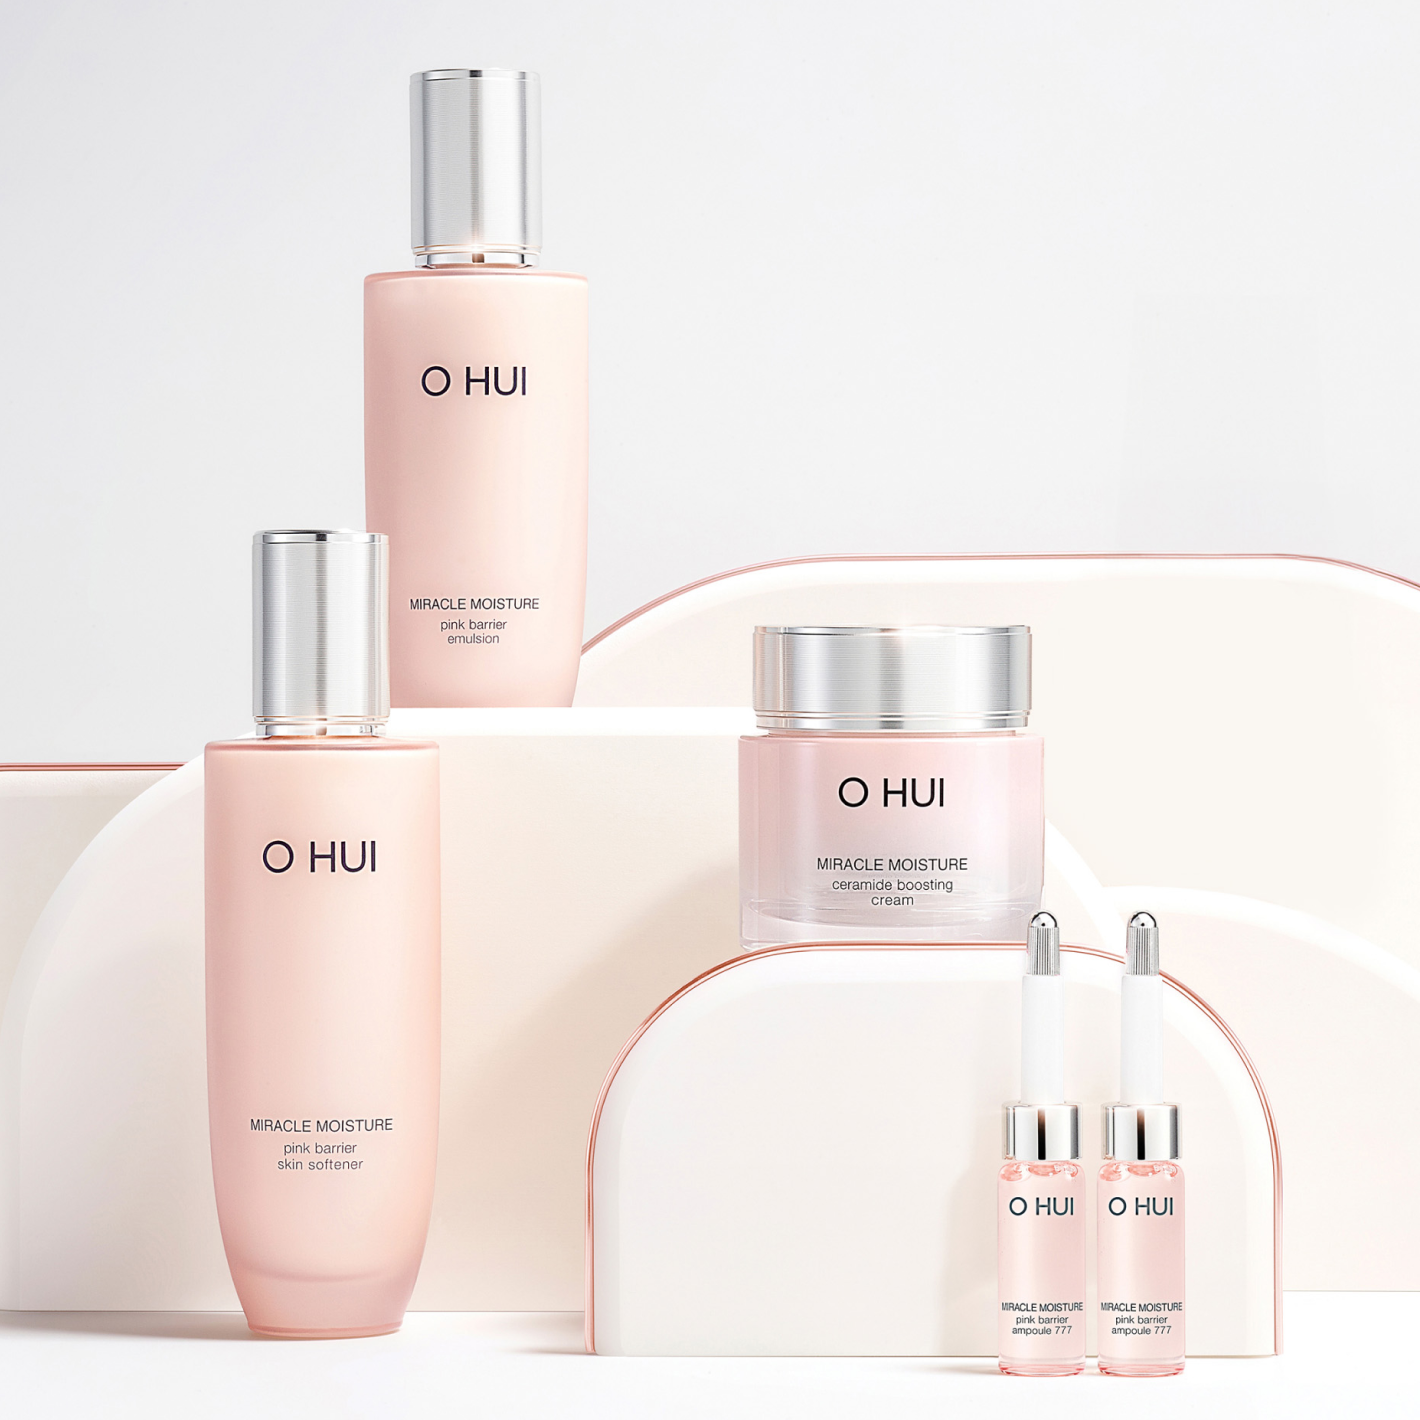 A display of OHUI Miracle Moisture skin care products, including pink bottles and jars of varied sizes, neatly arranged against a white and soft pink background.